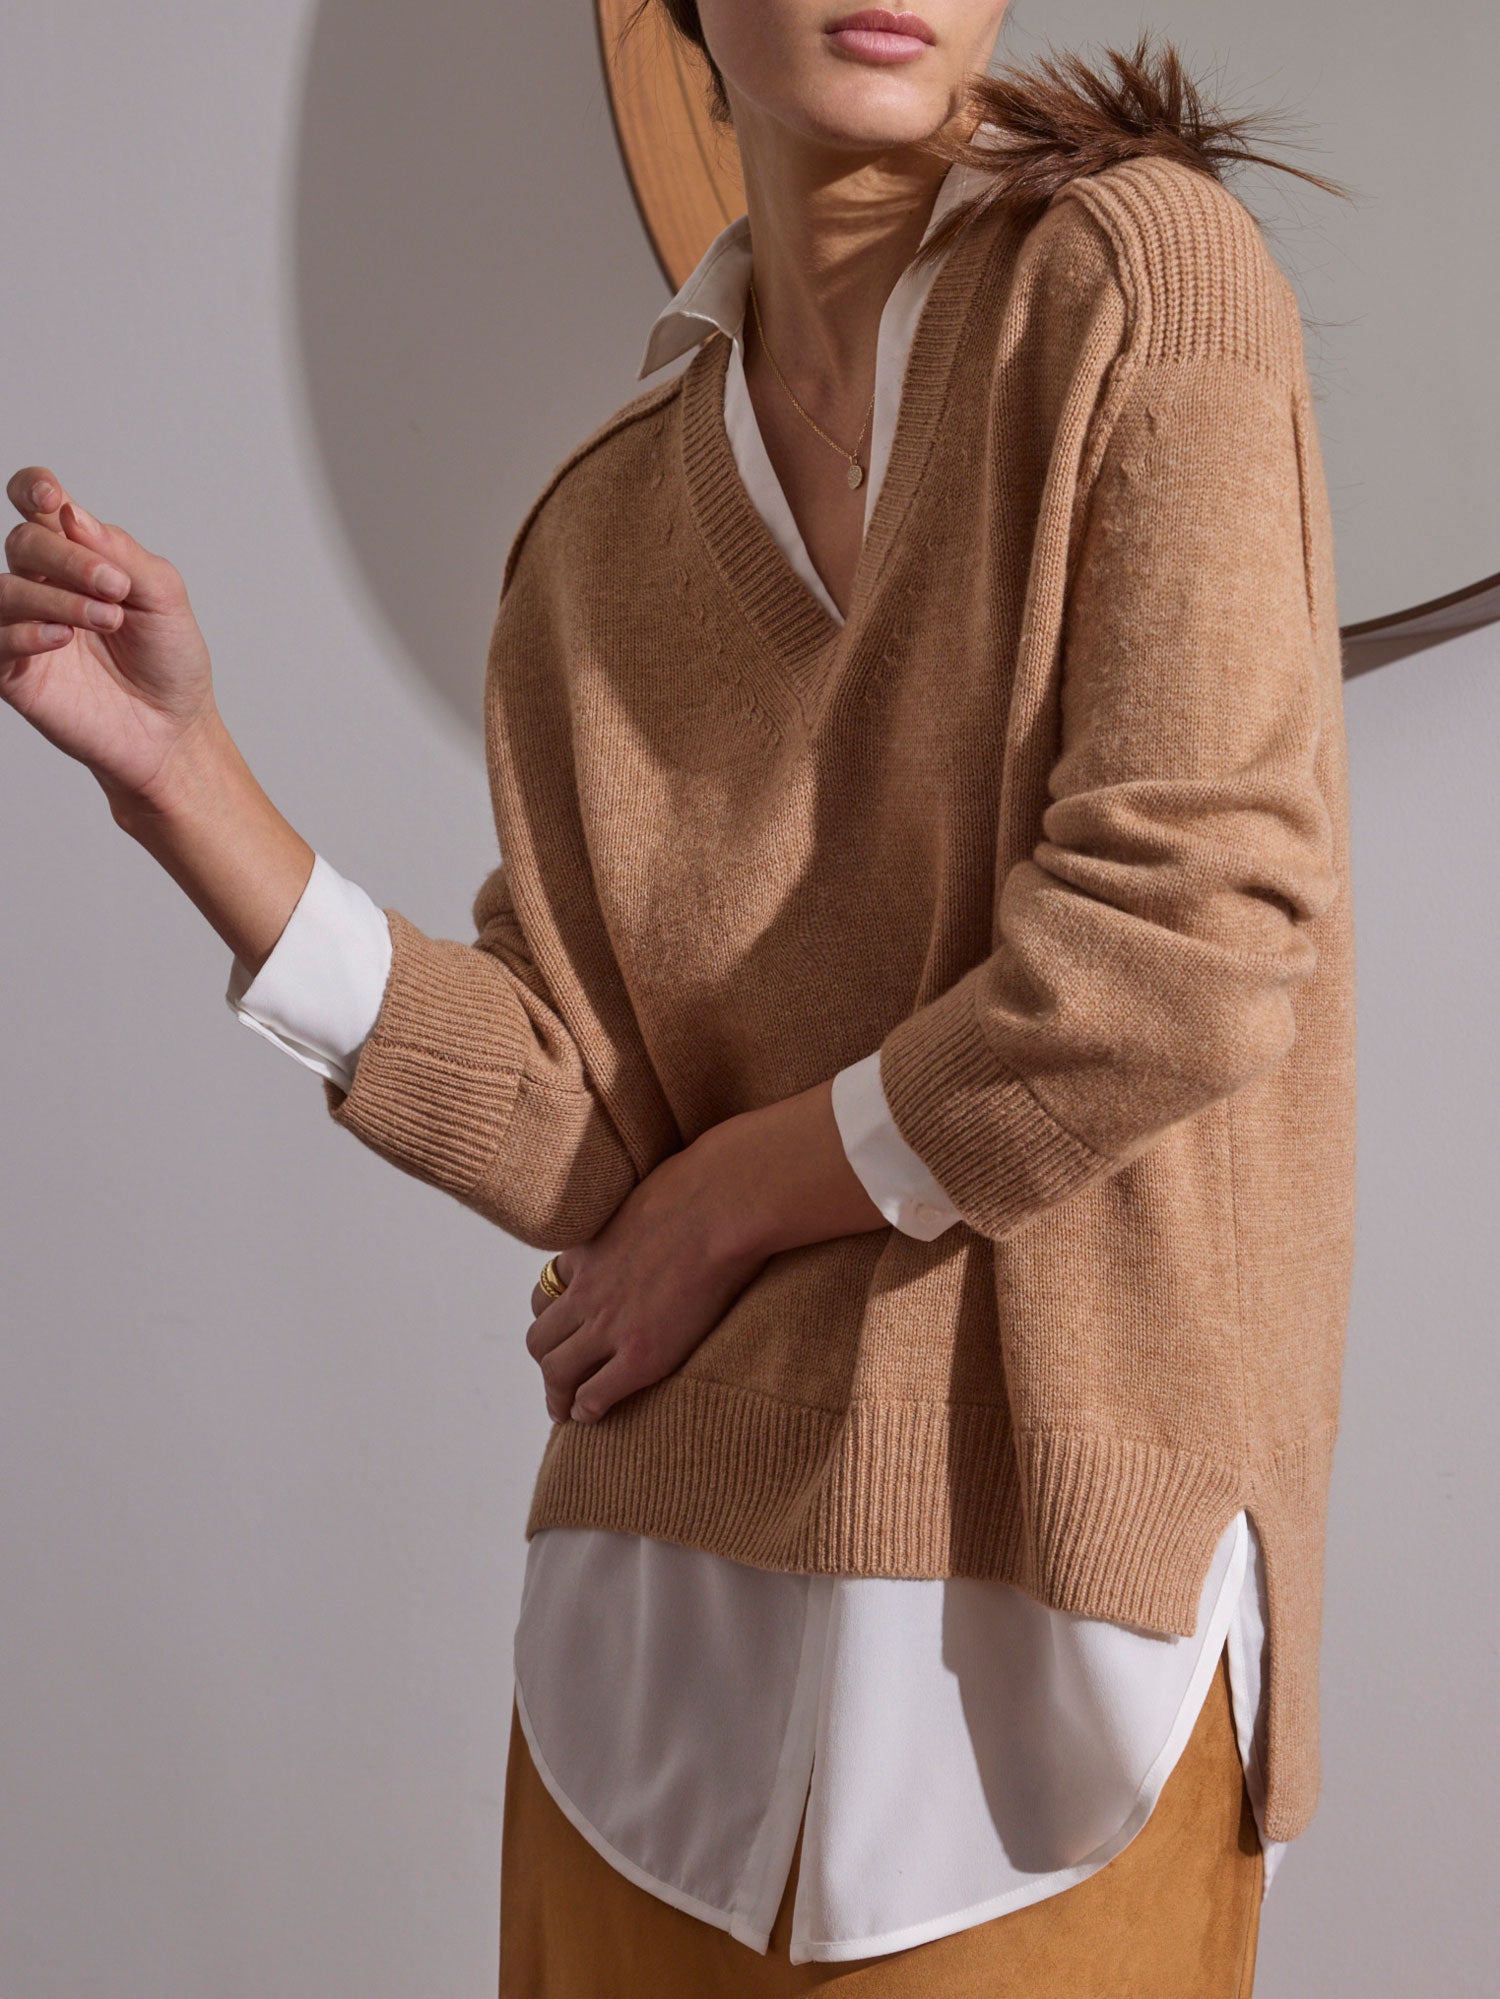 looker tan layered v-neck sweater front view